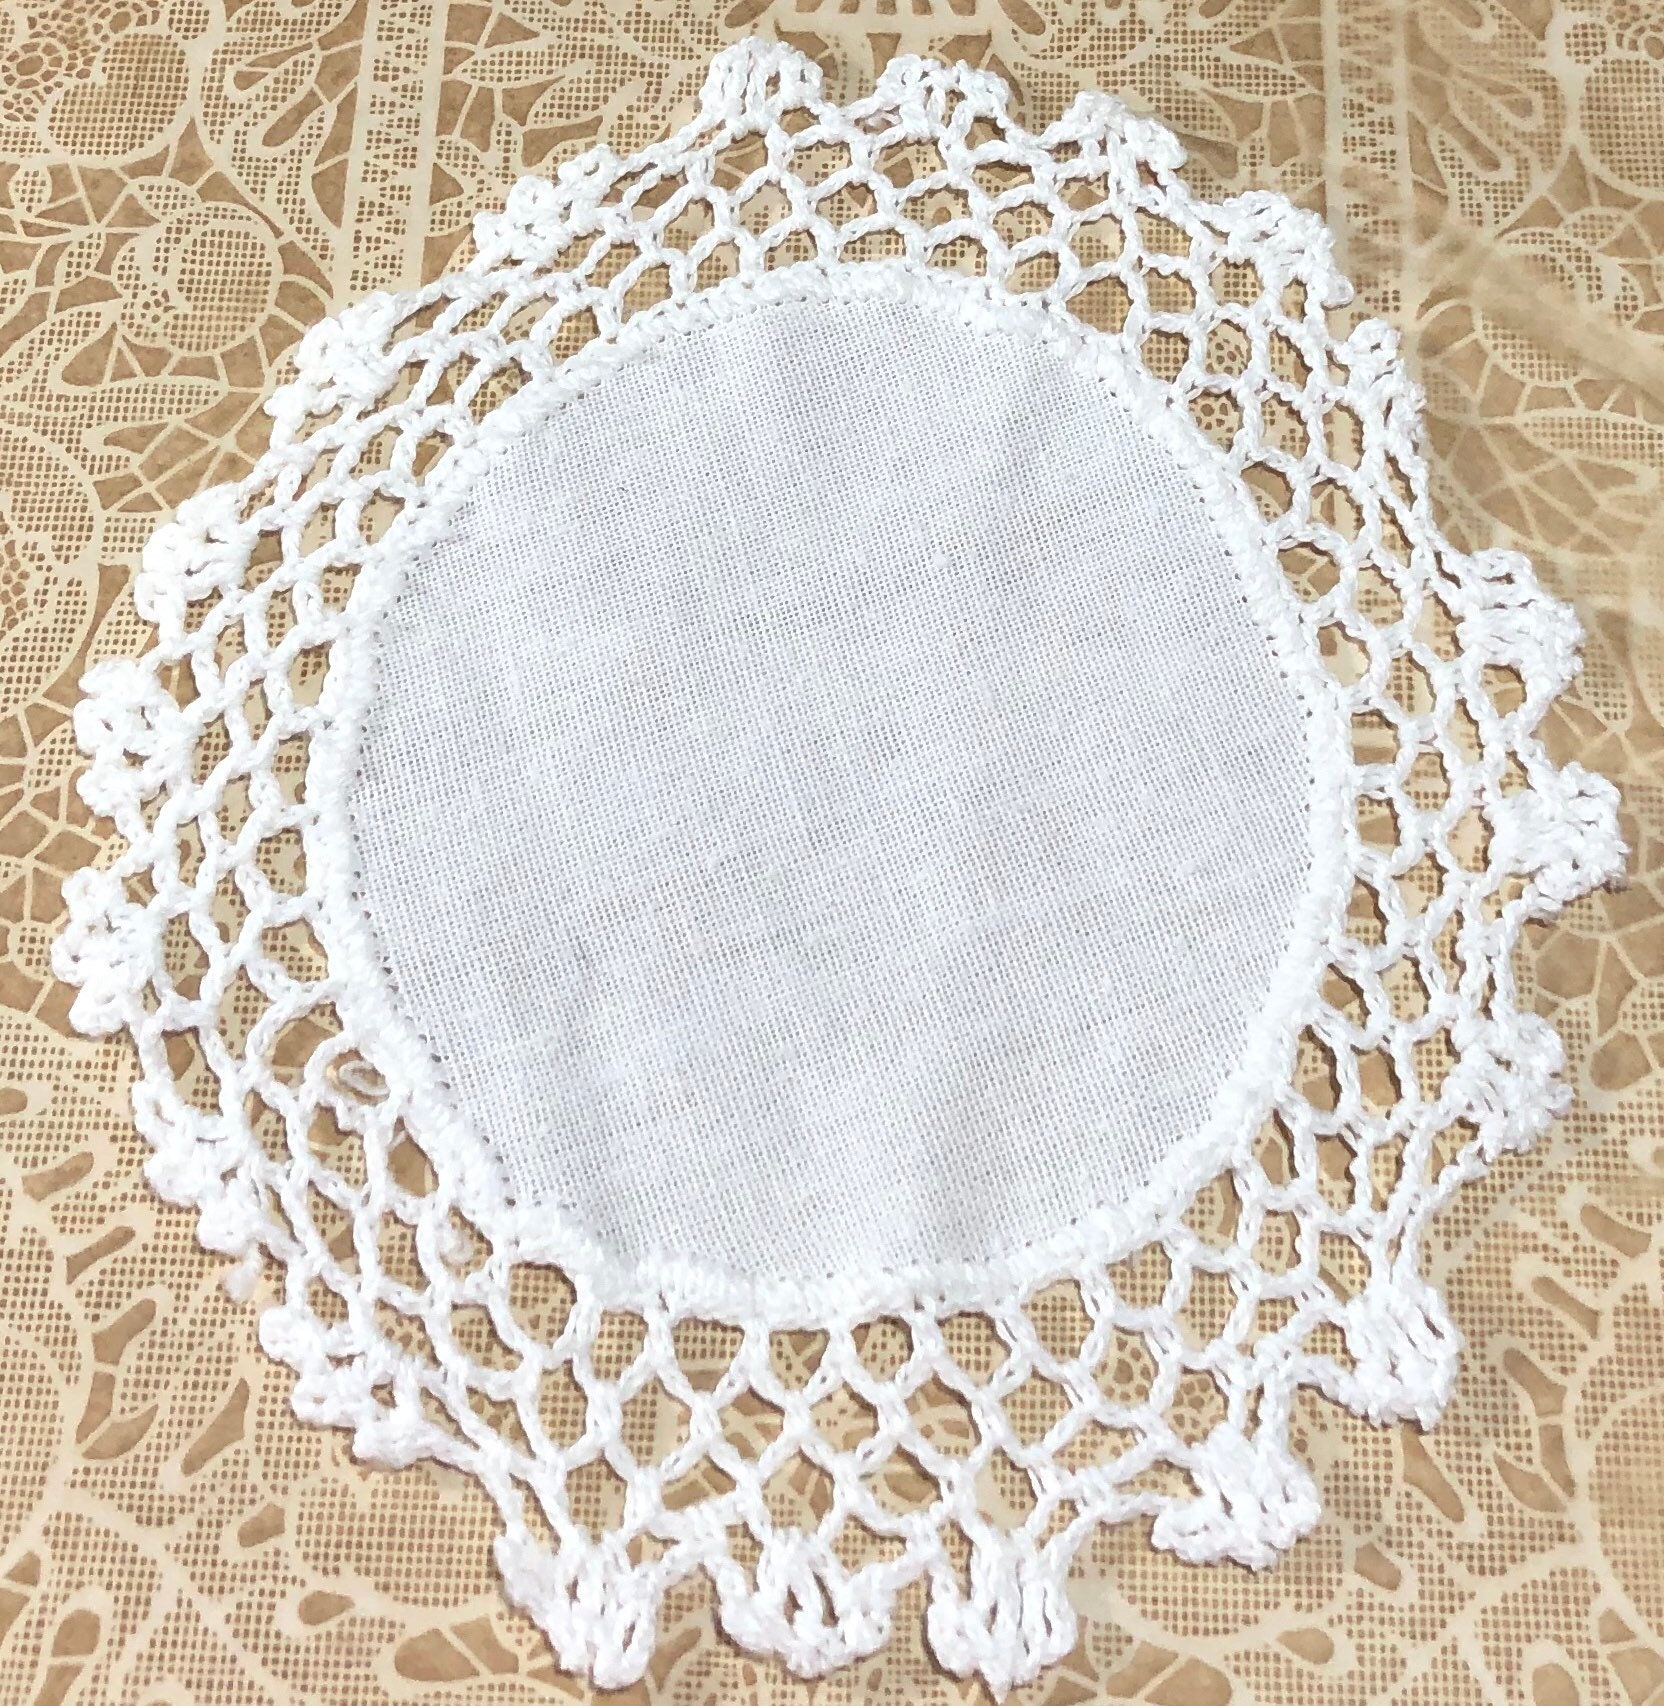 Crocheted Doilies 2 PIECES